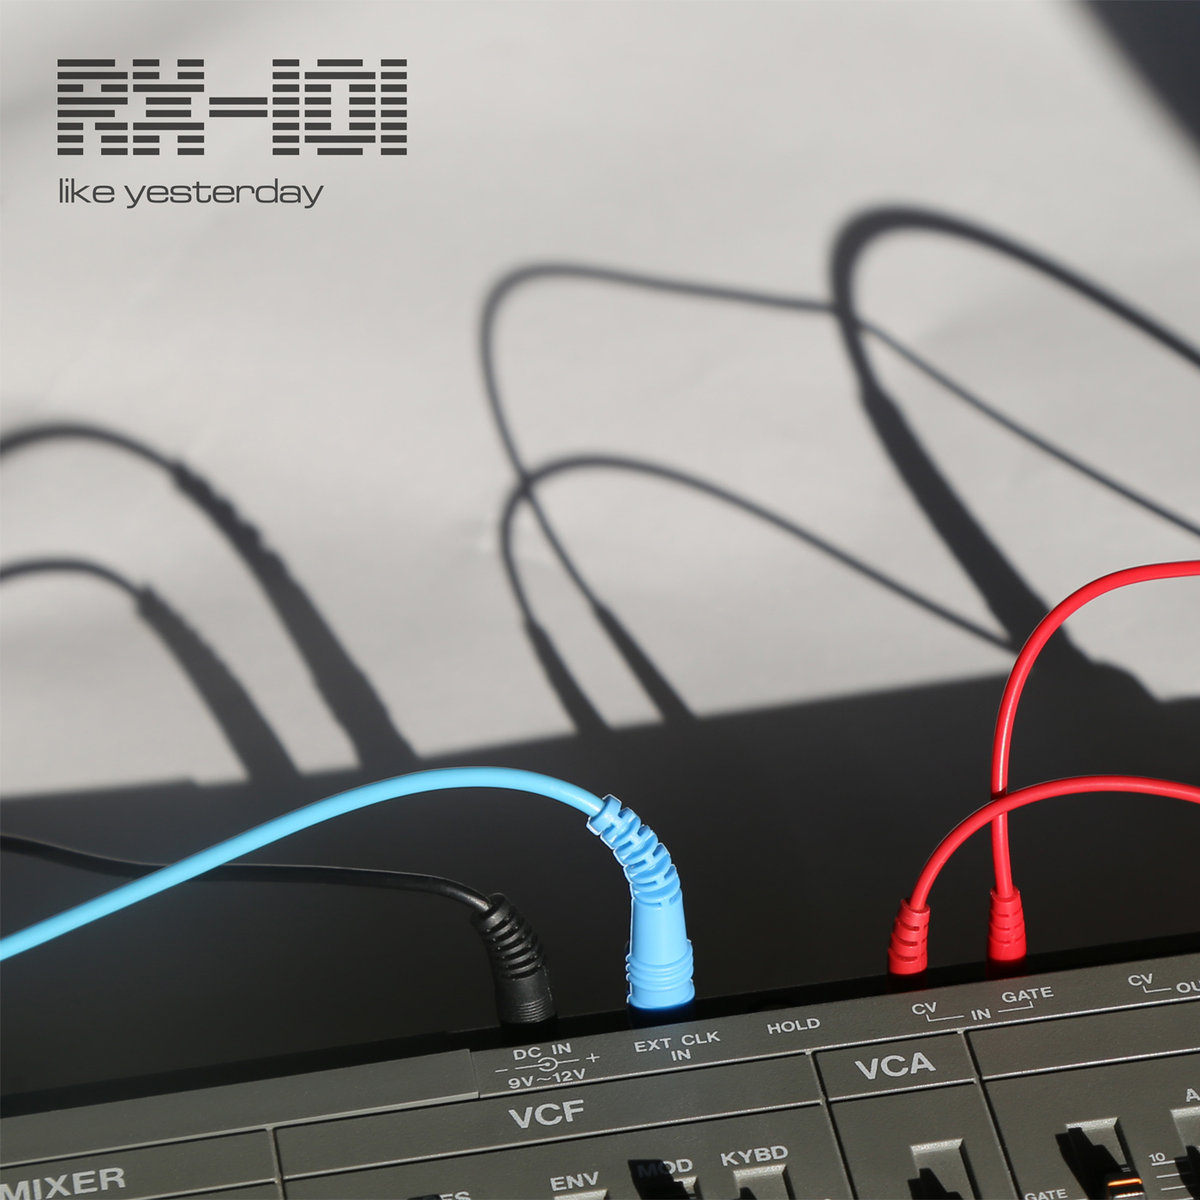 RX-101 – Like Yesterday